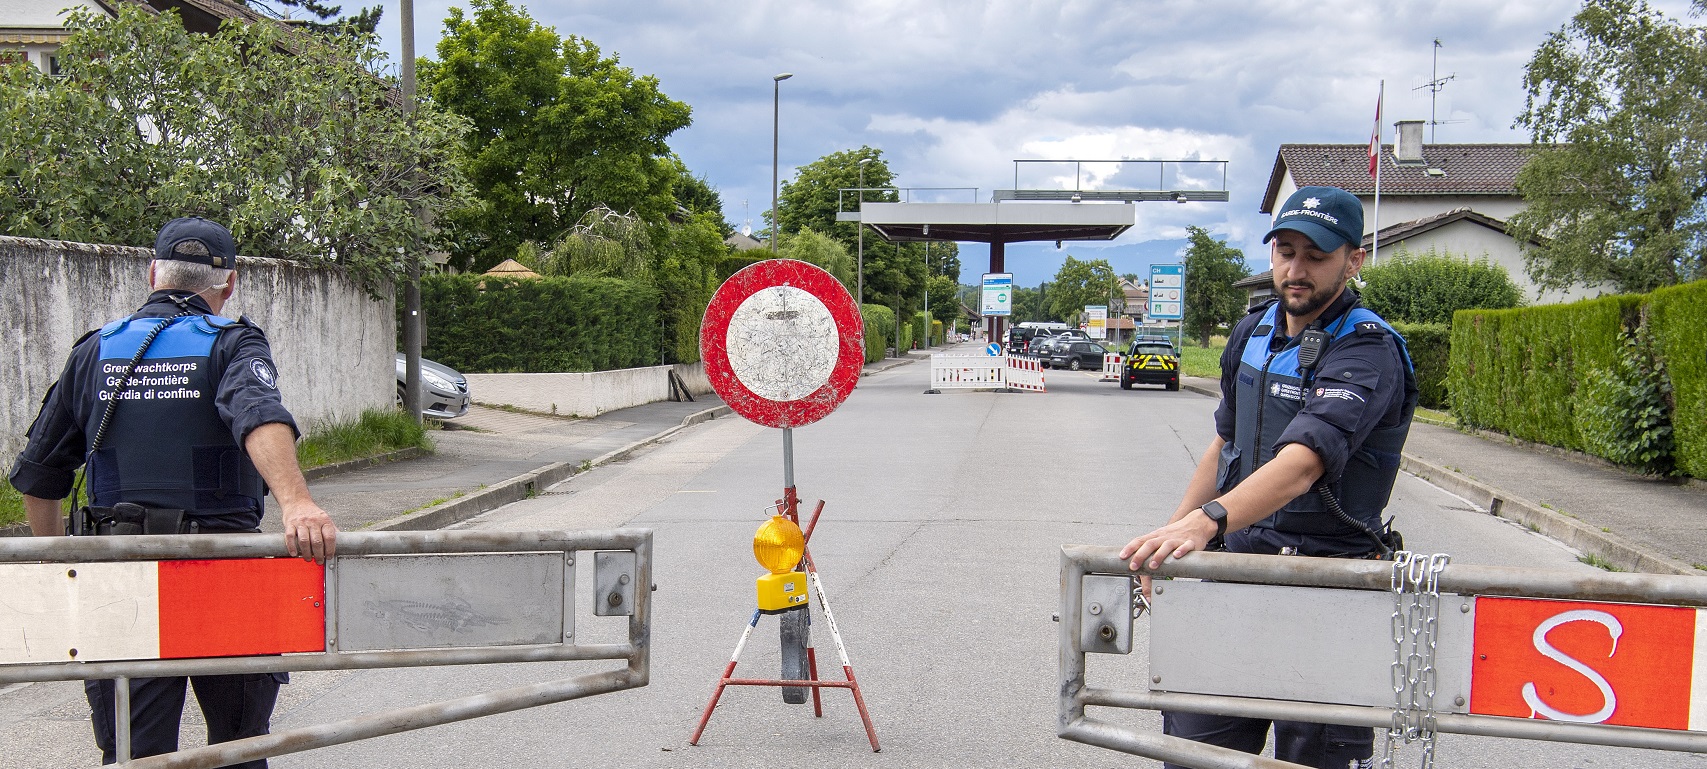 epaselect epa08485213 Two border guards opens the barrier that closed access to customs, in Thonex near Geneva, Switzerland, 14 June 2020. Concrete blocks closed the road at the Swiss-French border during the state of emergency due to the coronavirus COVID-19. Switzerland will open its borders to the EU and EFTA countries and to the United Kingdom on Monday, June 15. Border controls within the Schengen area are abolished and shopping tourism is allowed again.  EPA/MARTIAL TREZZINI